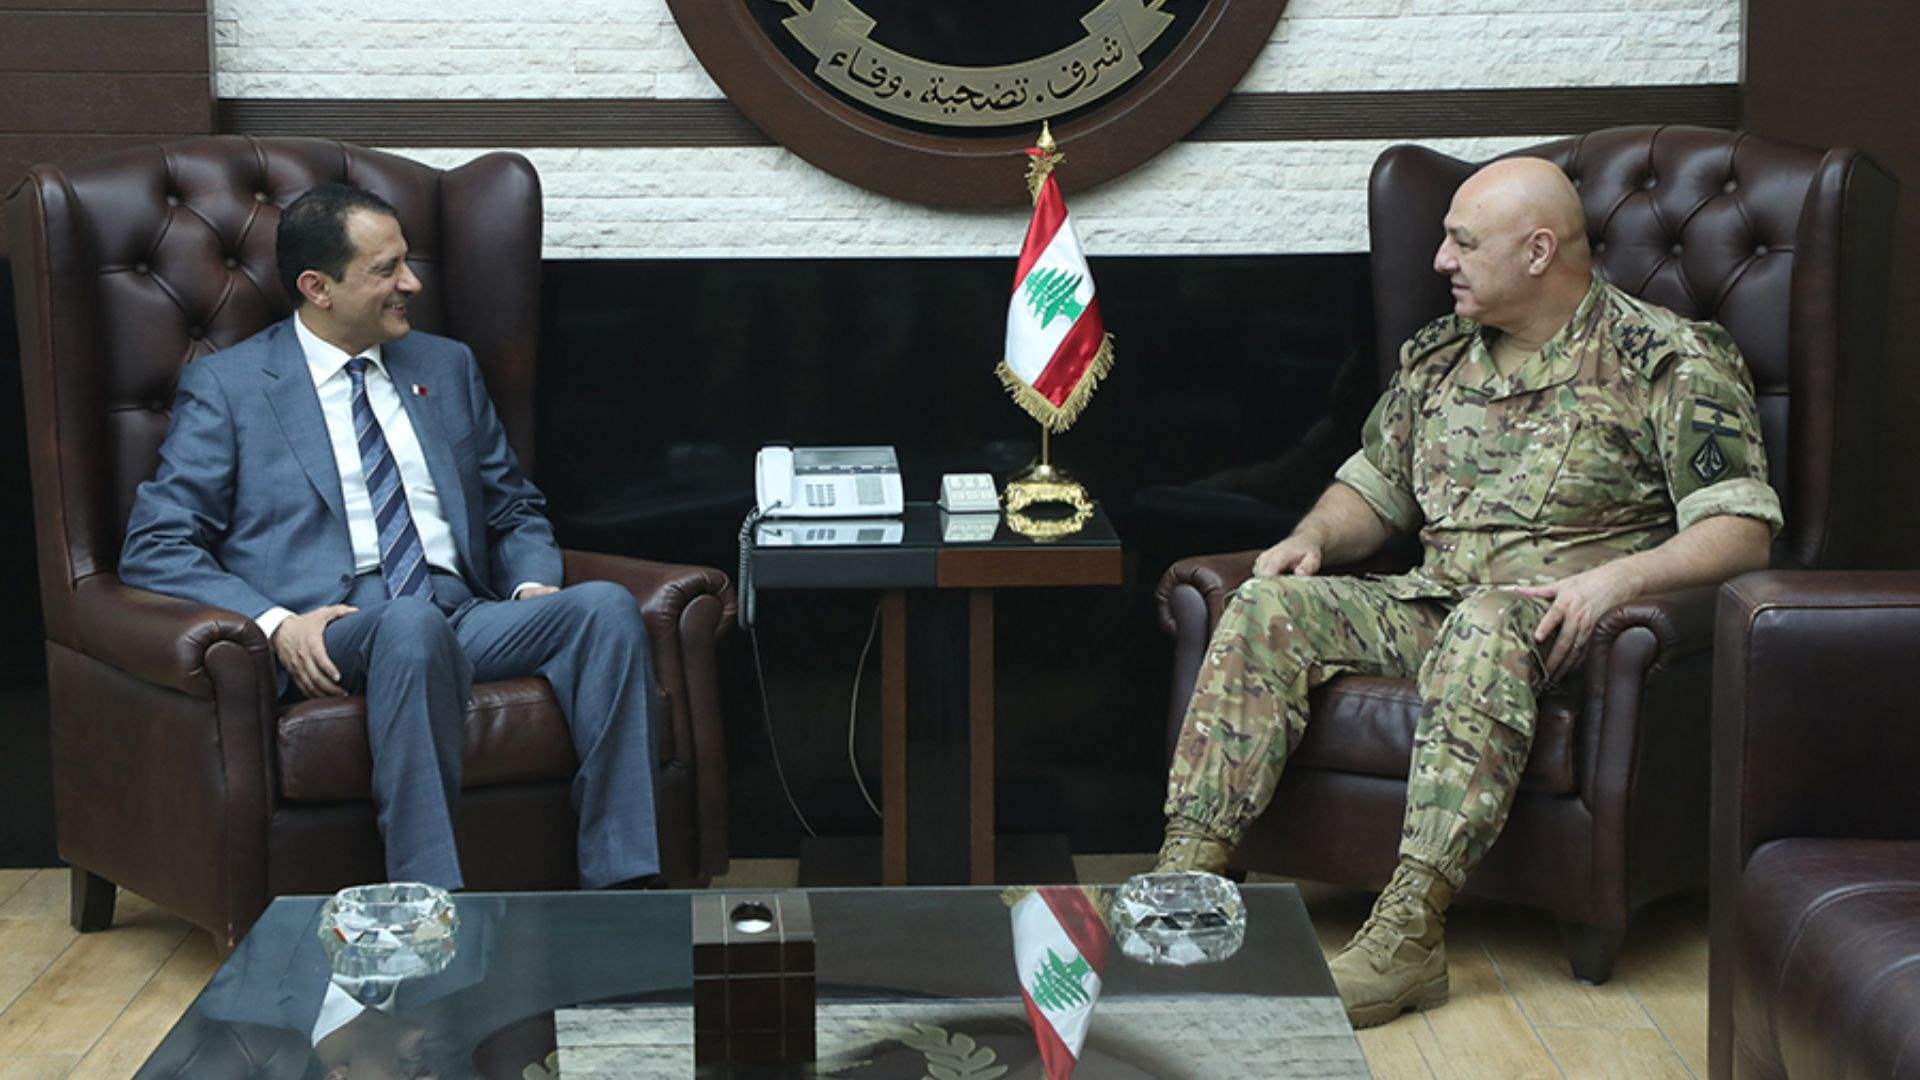 Qatari Ambassador confirms solidarity with Lebanon in meeting with Army Commander